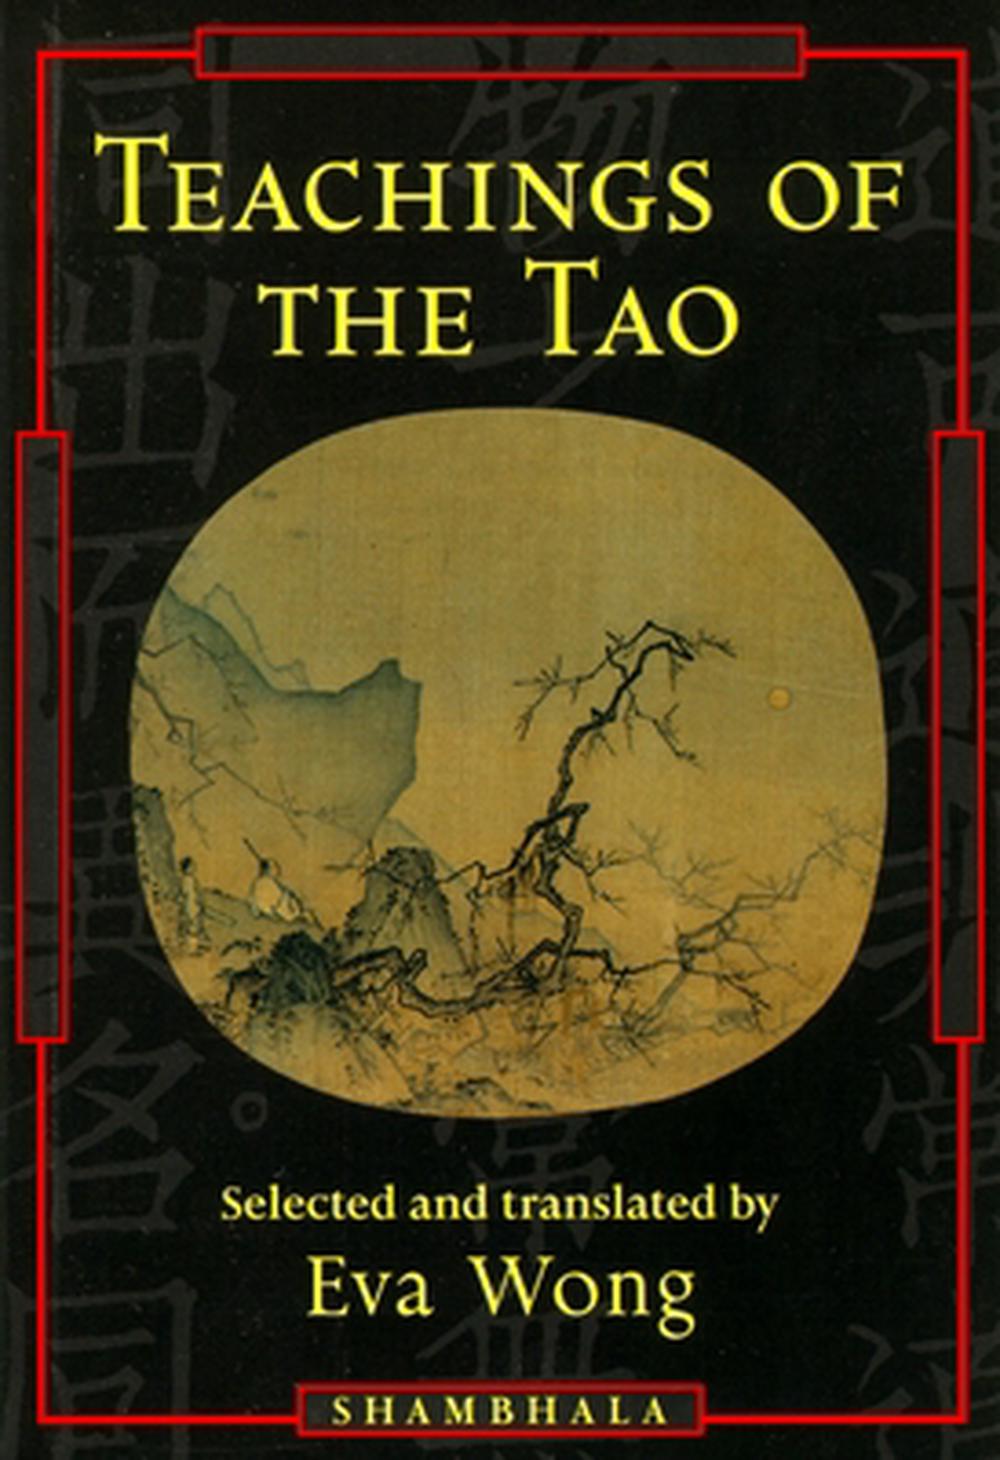 Teachings of the Tao Readings from the Taoist Spiritual Tradition by